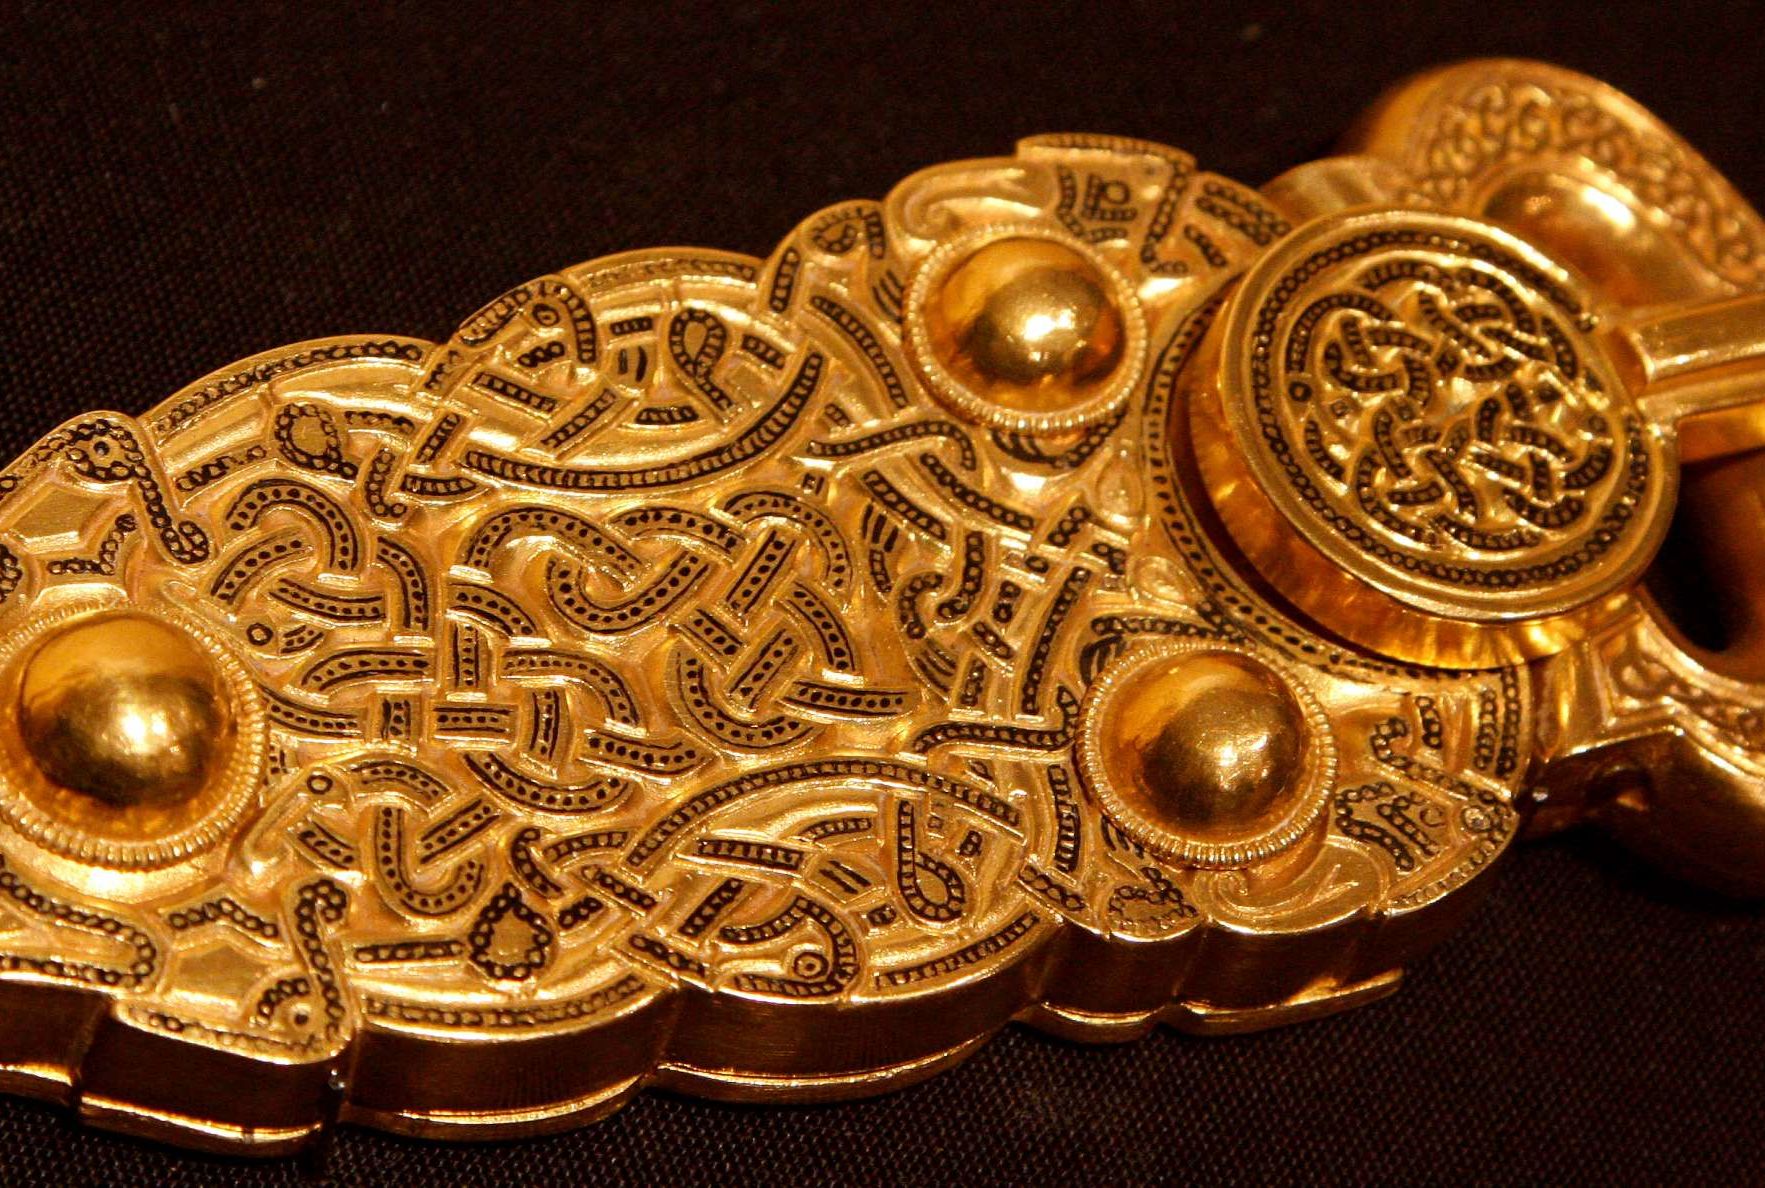 Ancient Purse Lid from Sutton Hoo Ship-Burial